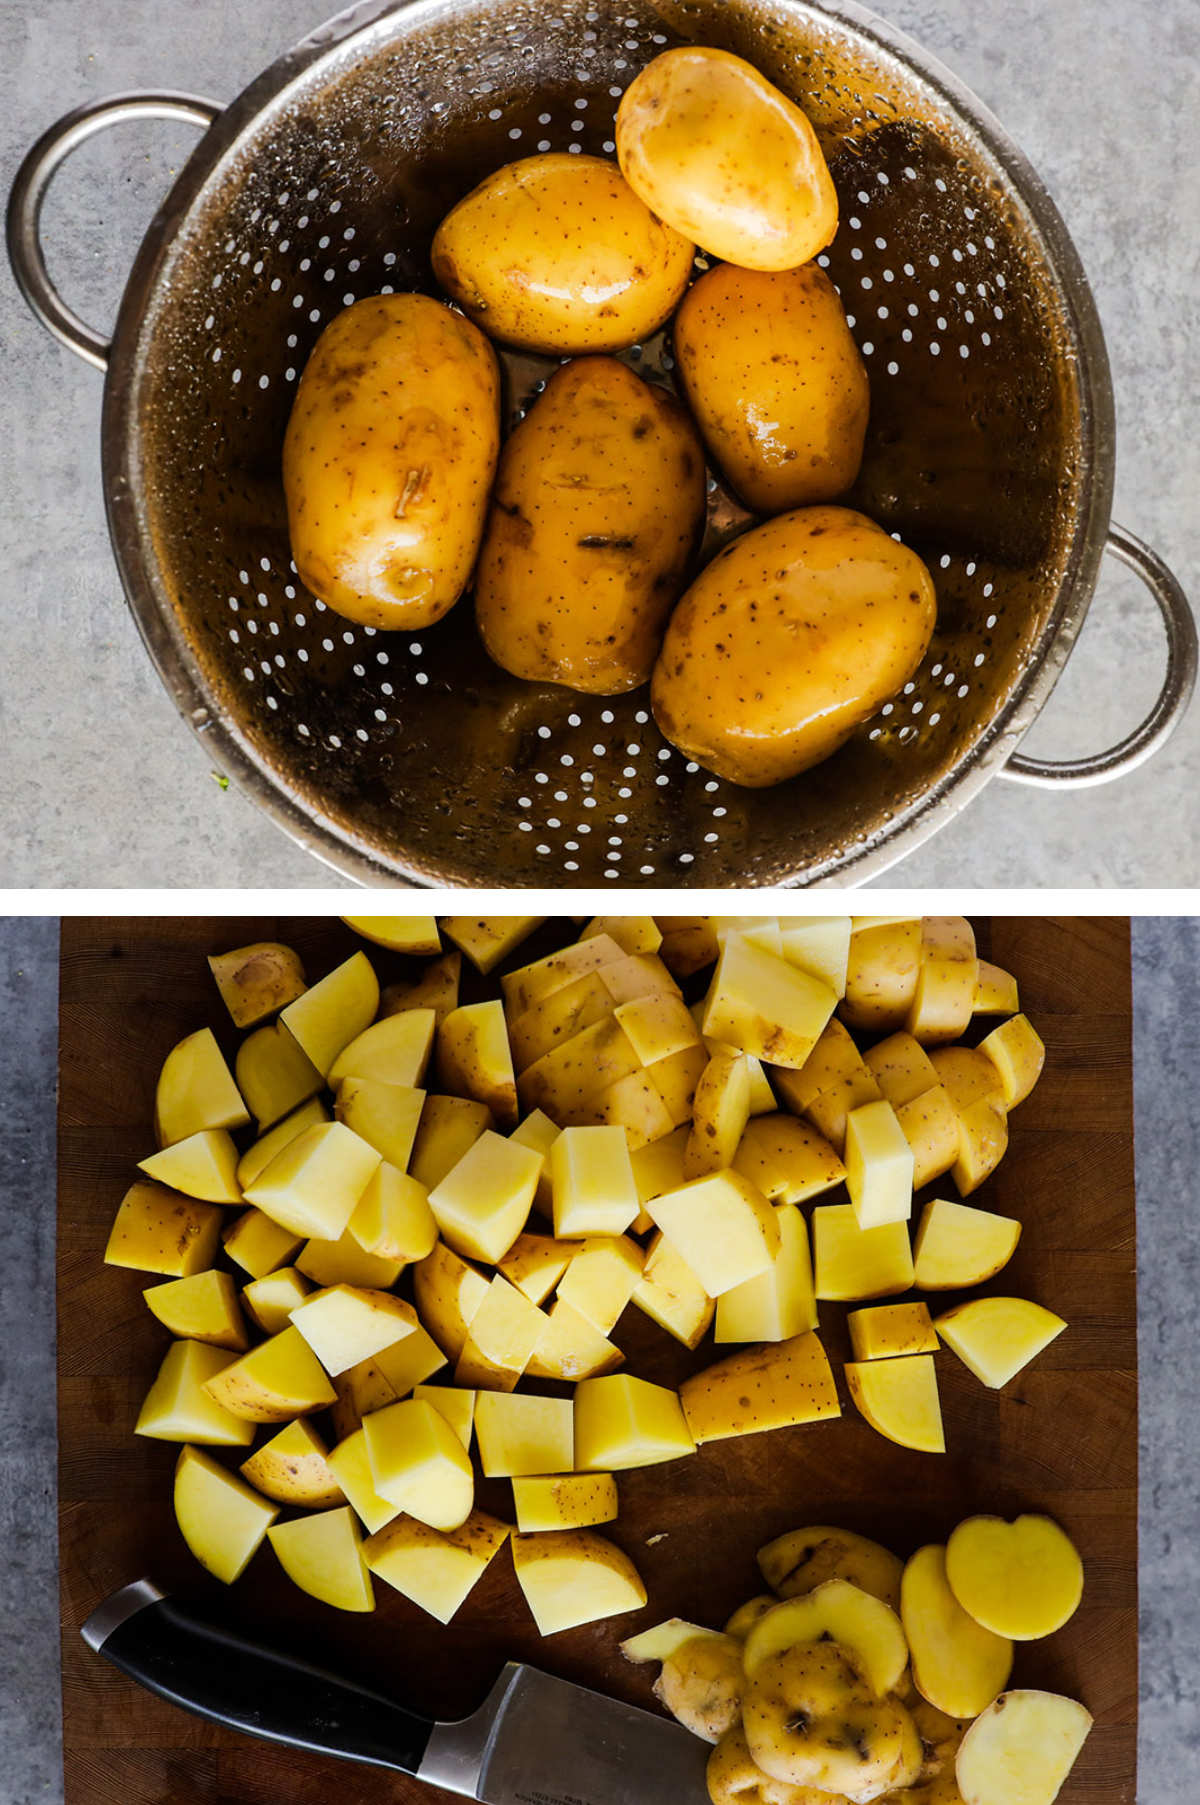 Two overhead images in one: 1. Rinsed potatoes in metal strainer. 2. Chopped potatoes on cutting board with chef knife at bottom of image. 